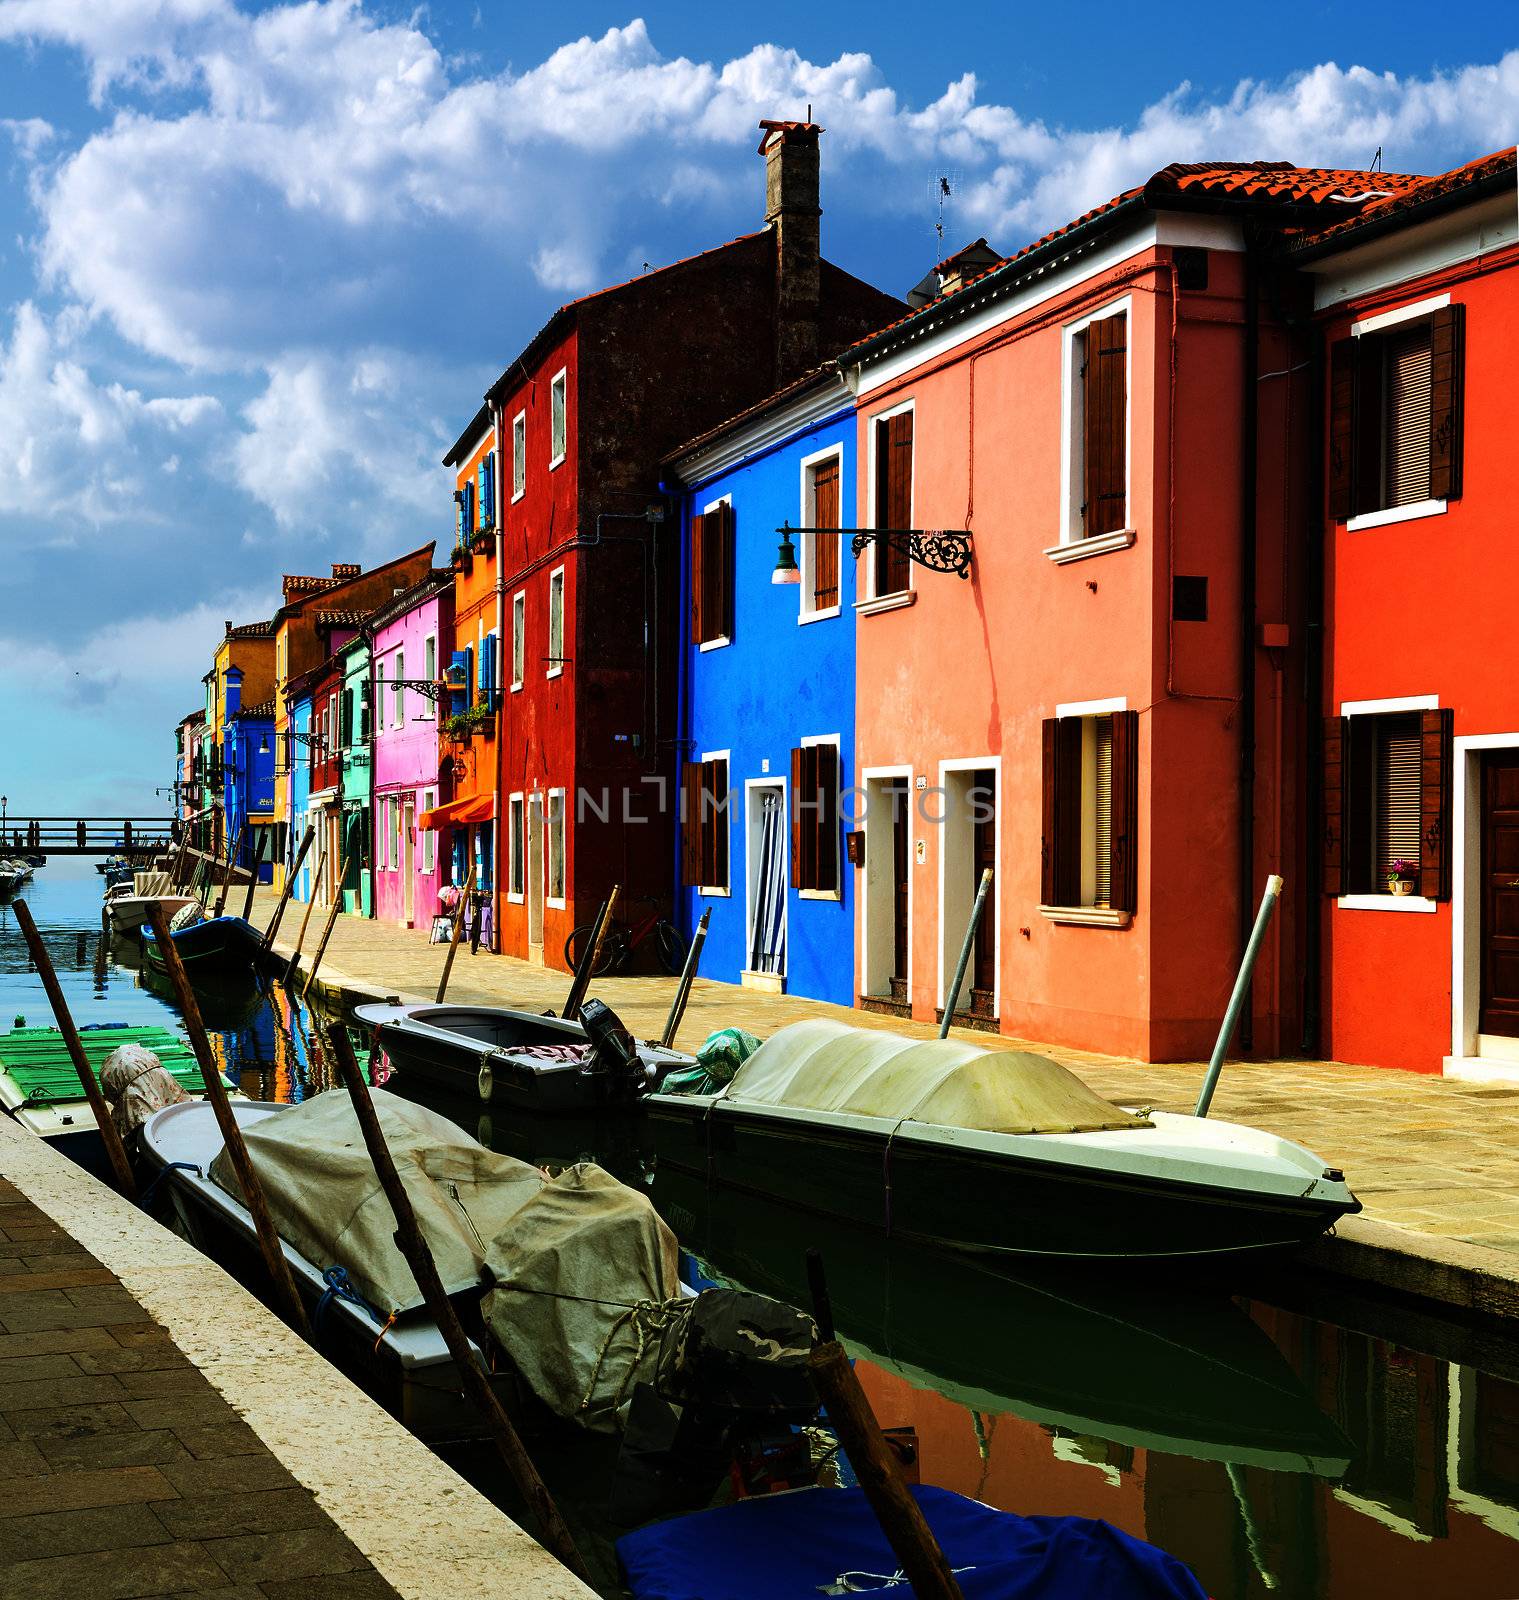 Colorful buildings in Burano island sunny street, Venise, Italy